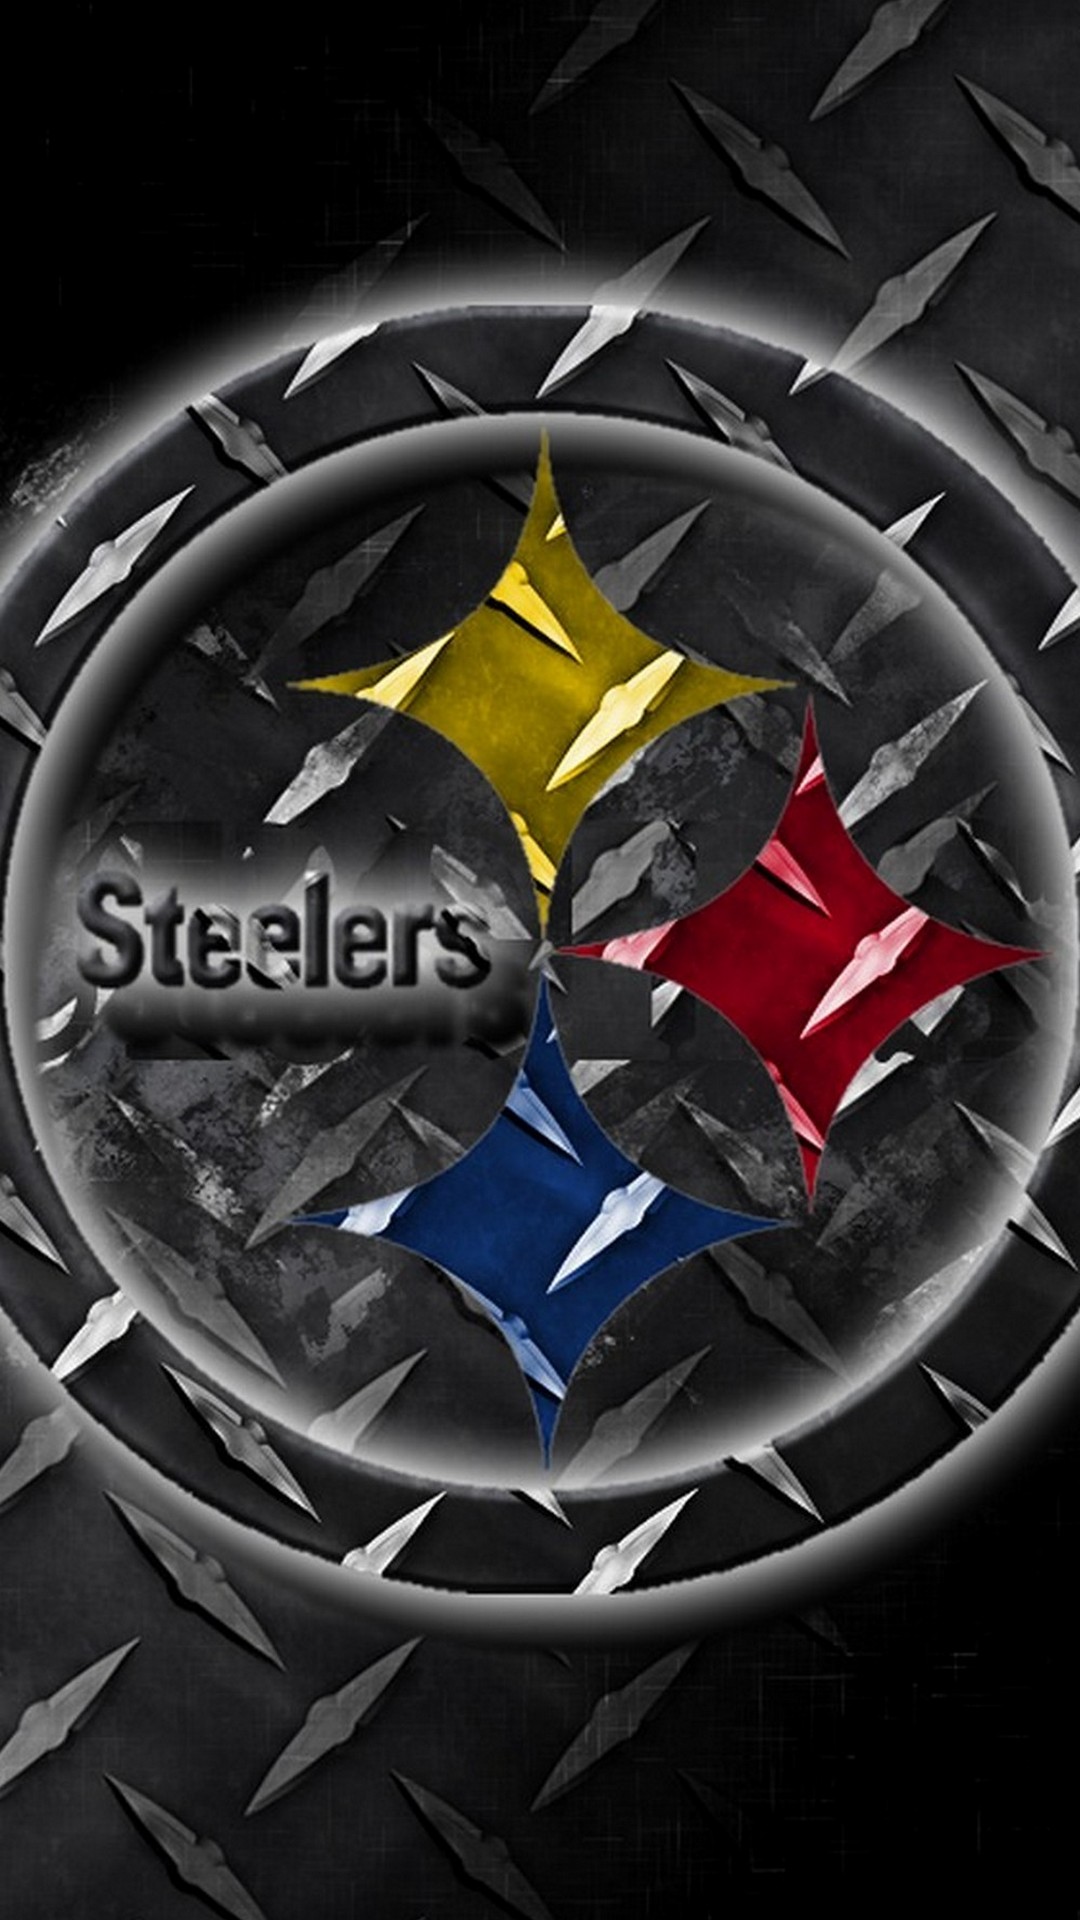 Wallpaper Pittsburgh Steelers Mobile With high-resolution 1080X1920 pixel. You can use this wallpaper for your Mac or Windows Desktop Background, iPhone, Android or Tablet and another Smartphone device